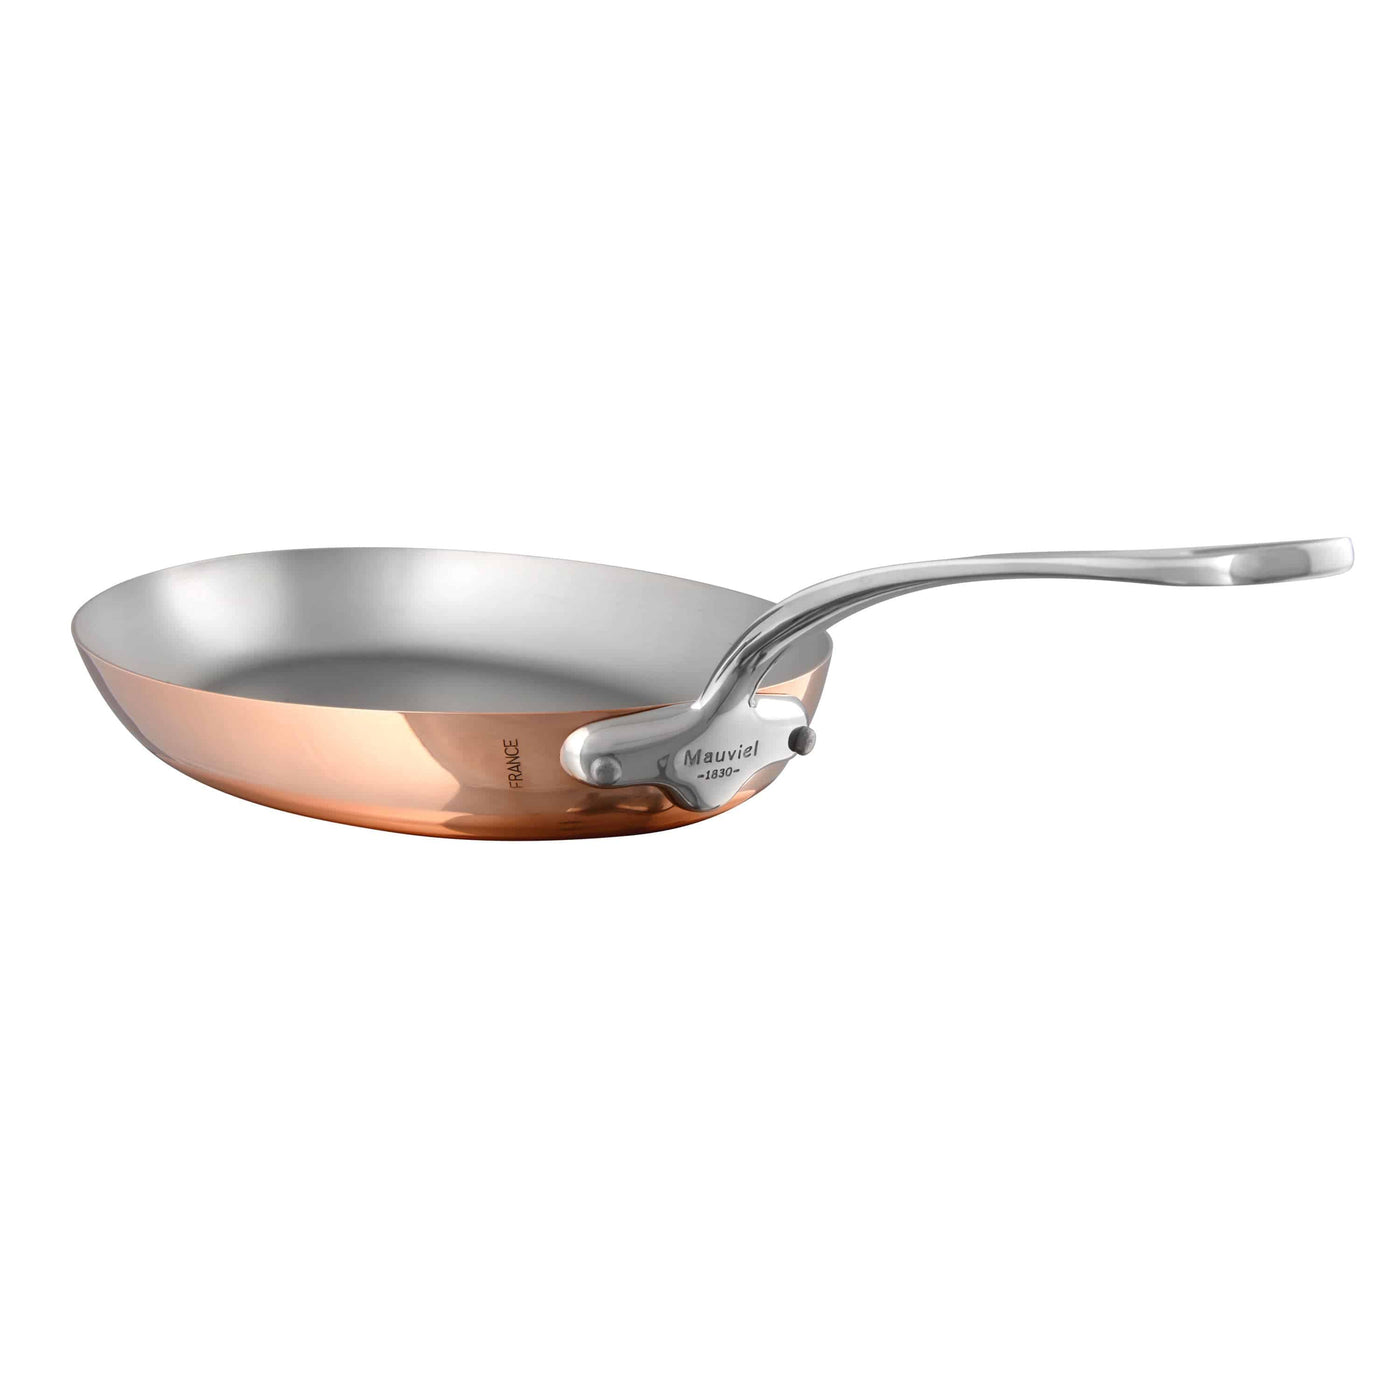 Mauviel M'heritage M150S Copper & Stainless Steel Oval Frying Pan, 14-in. - Kitchen Universe